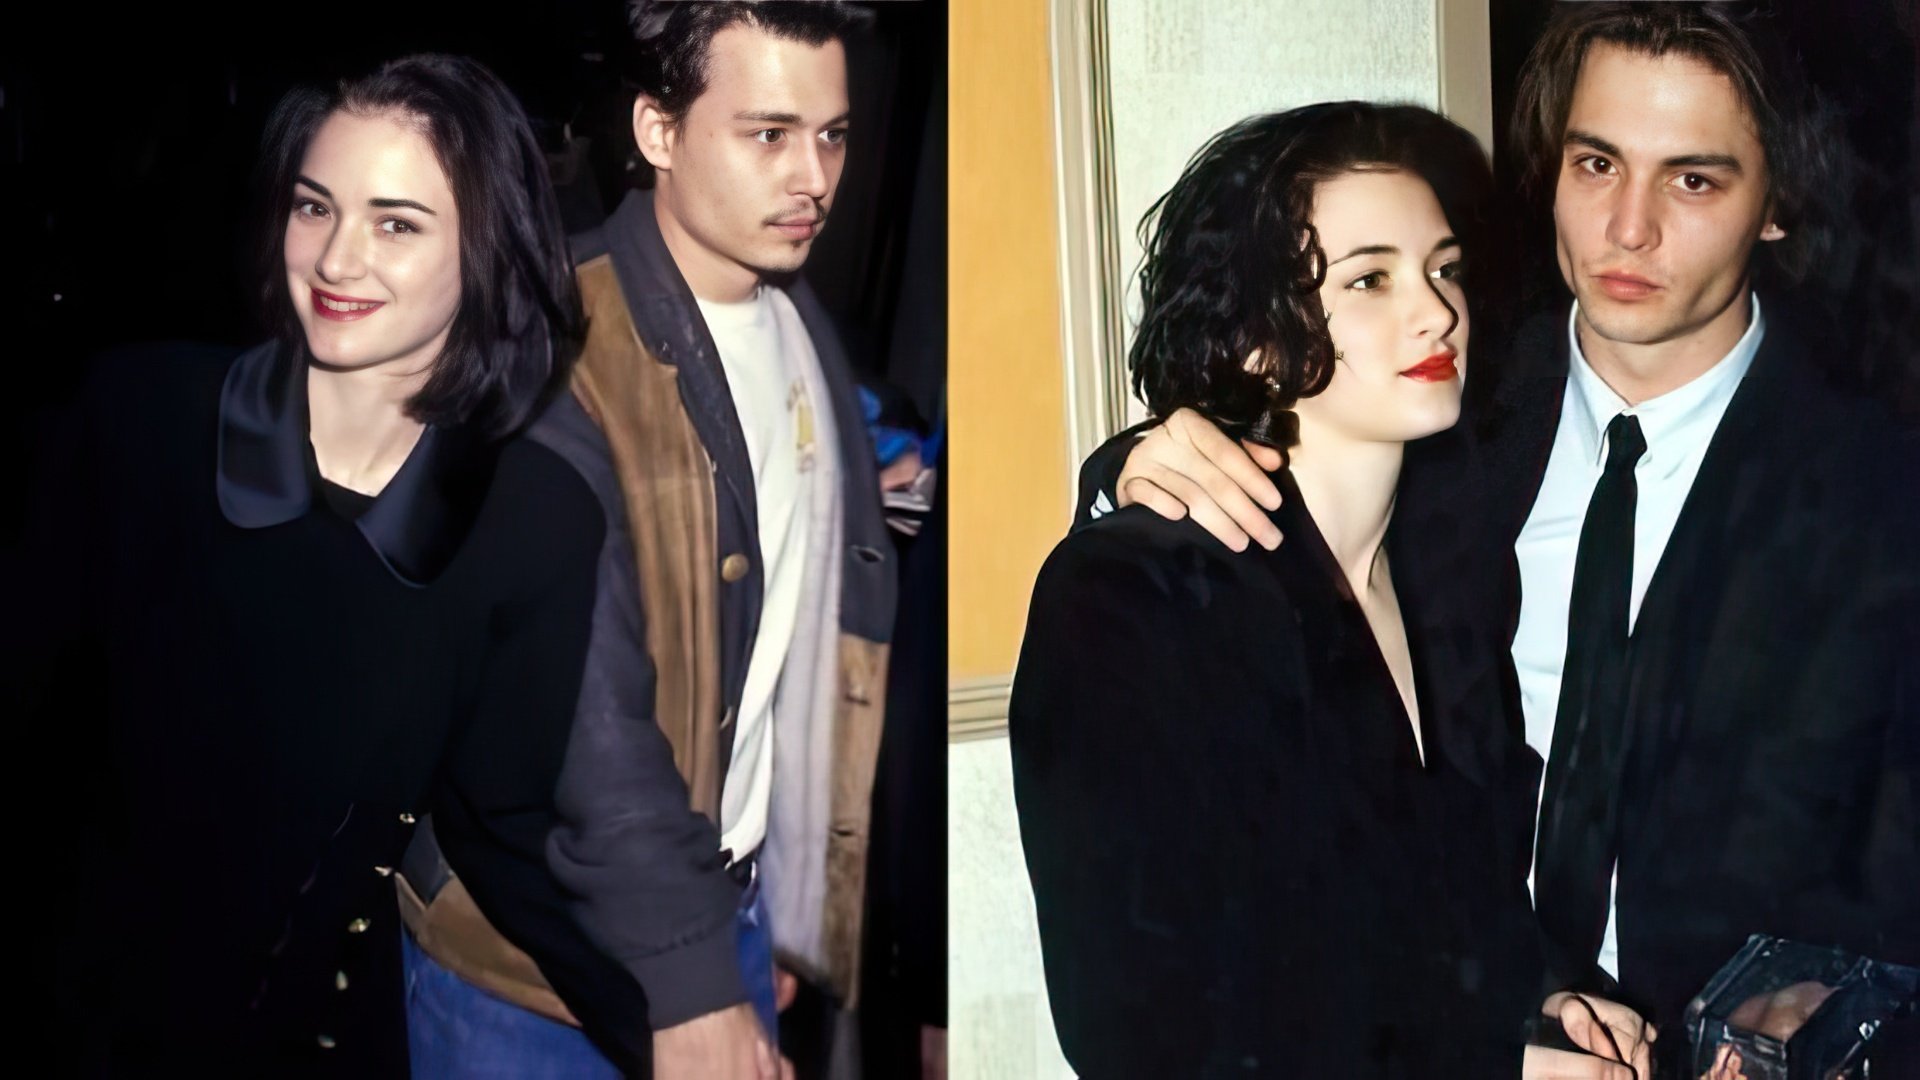 Winona Ryder and Johnny Depp met each other on a movie set